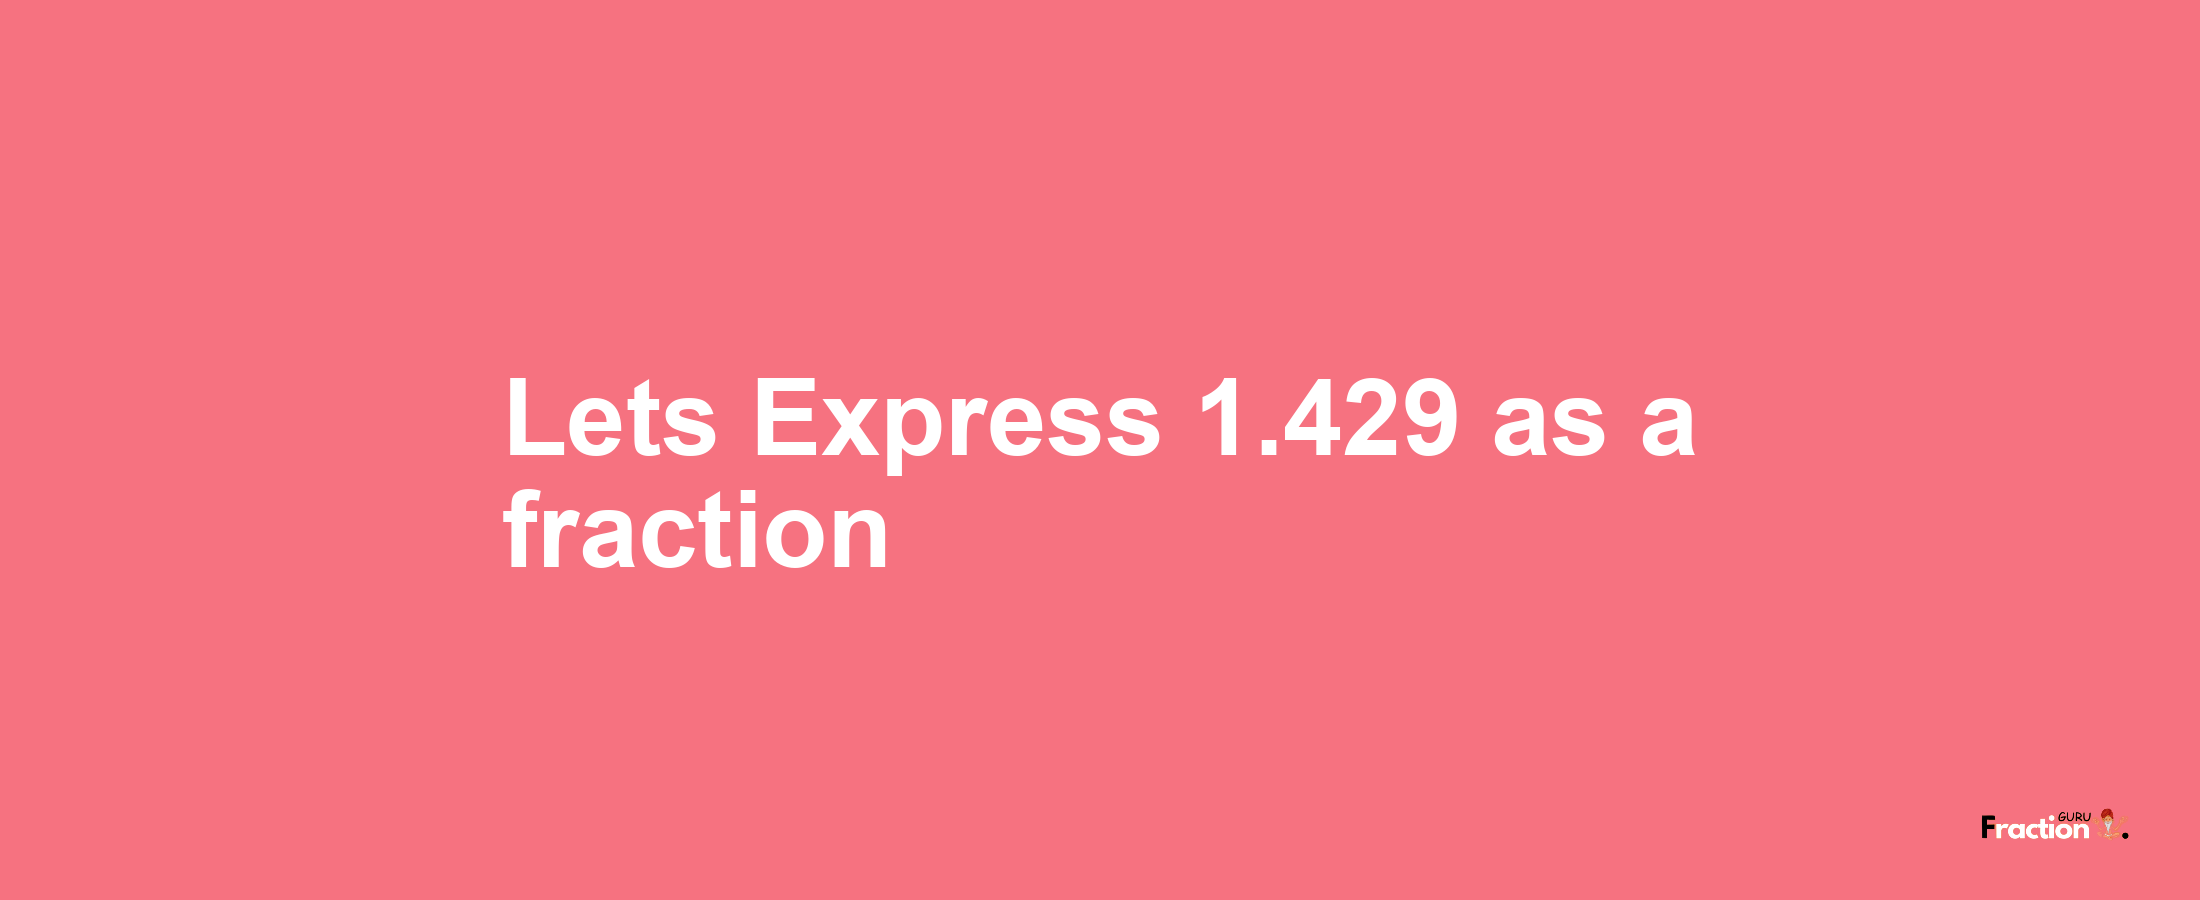 Lets Express 1.429 as afraction